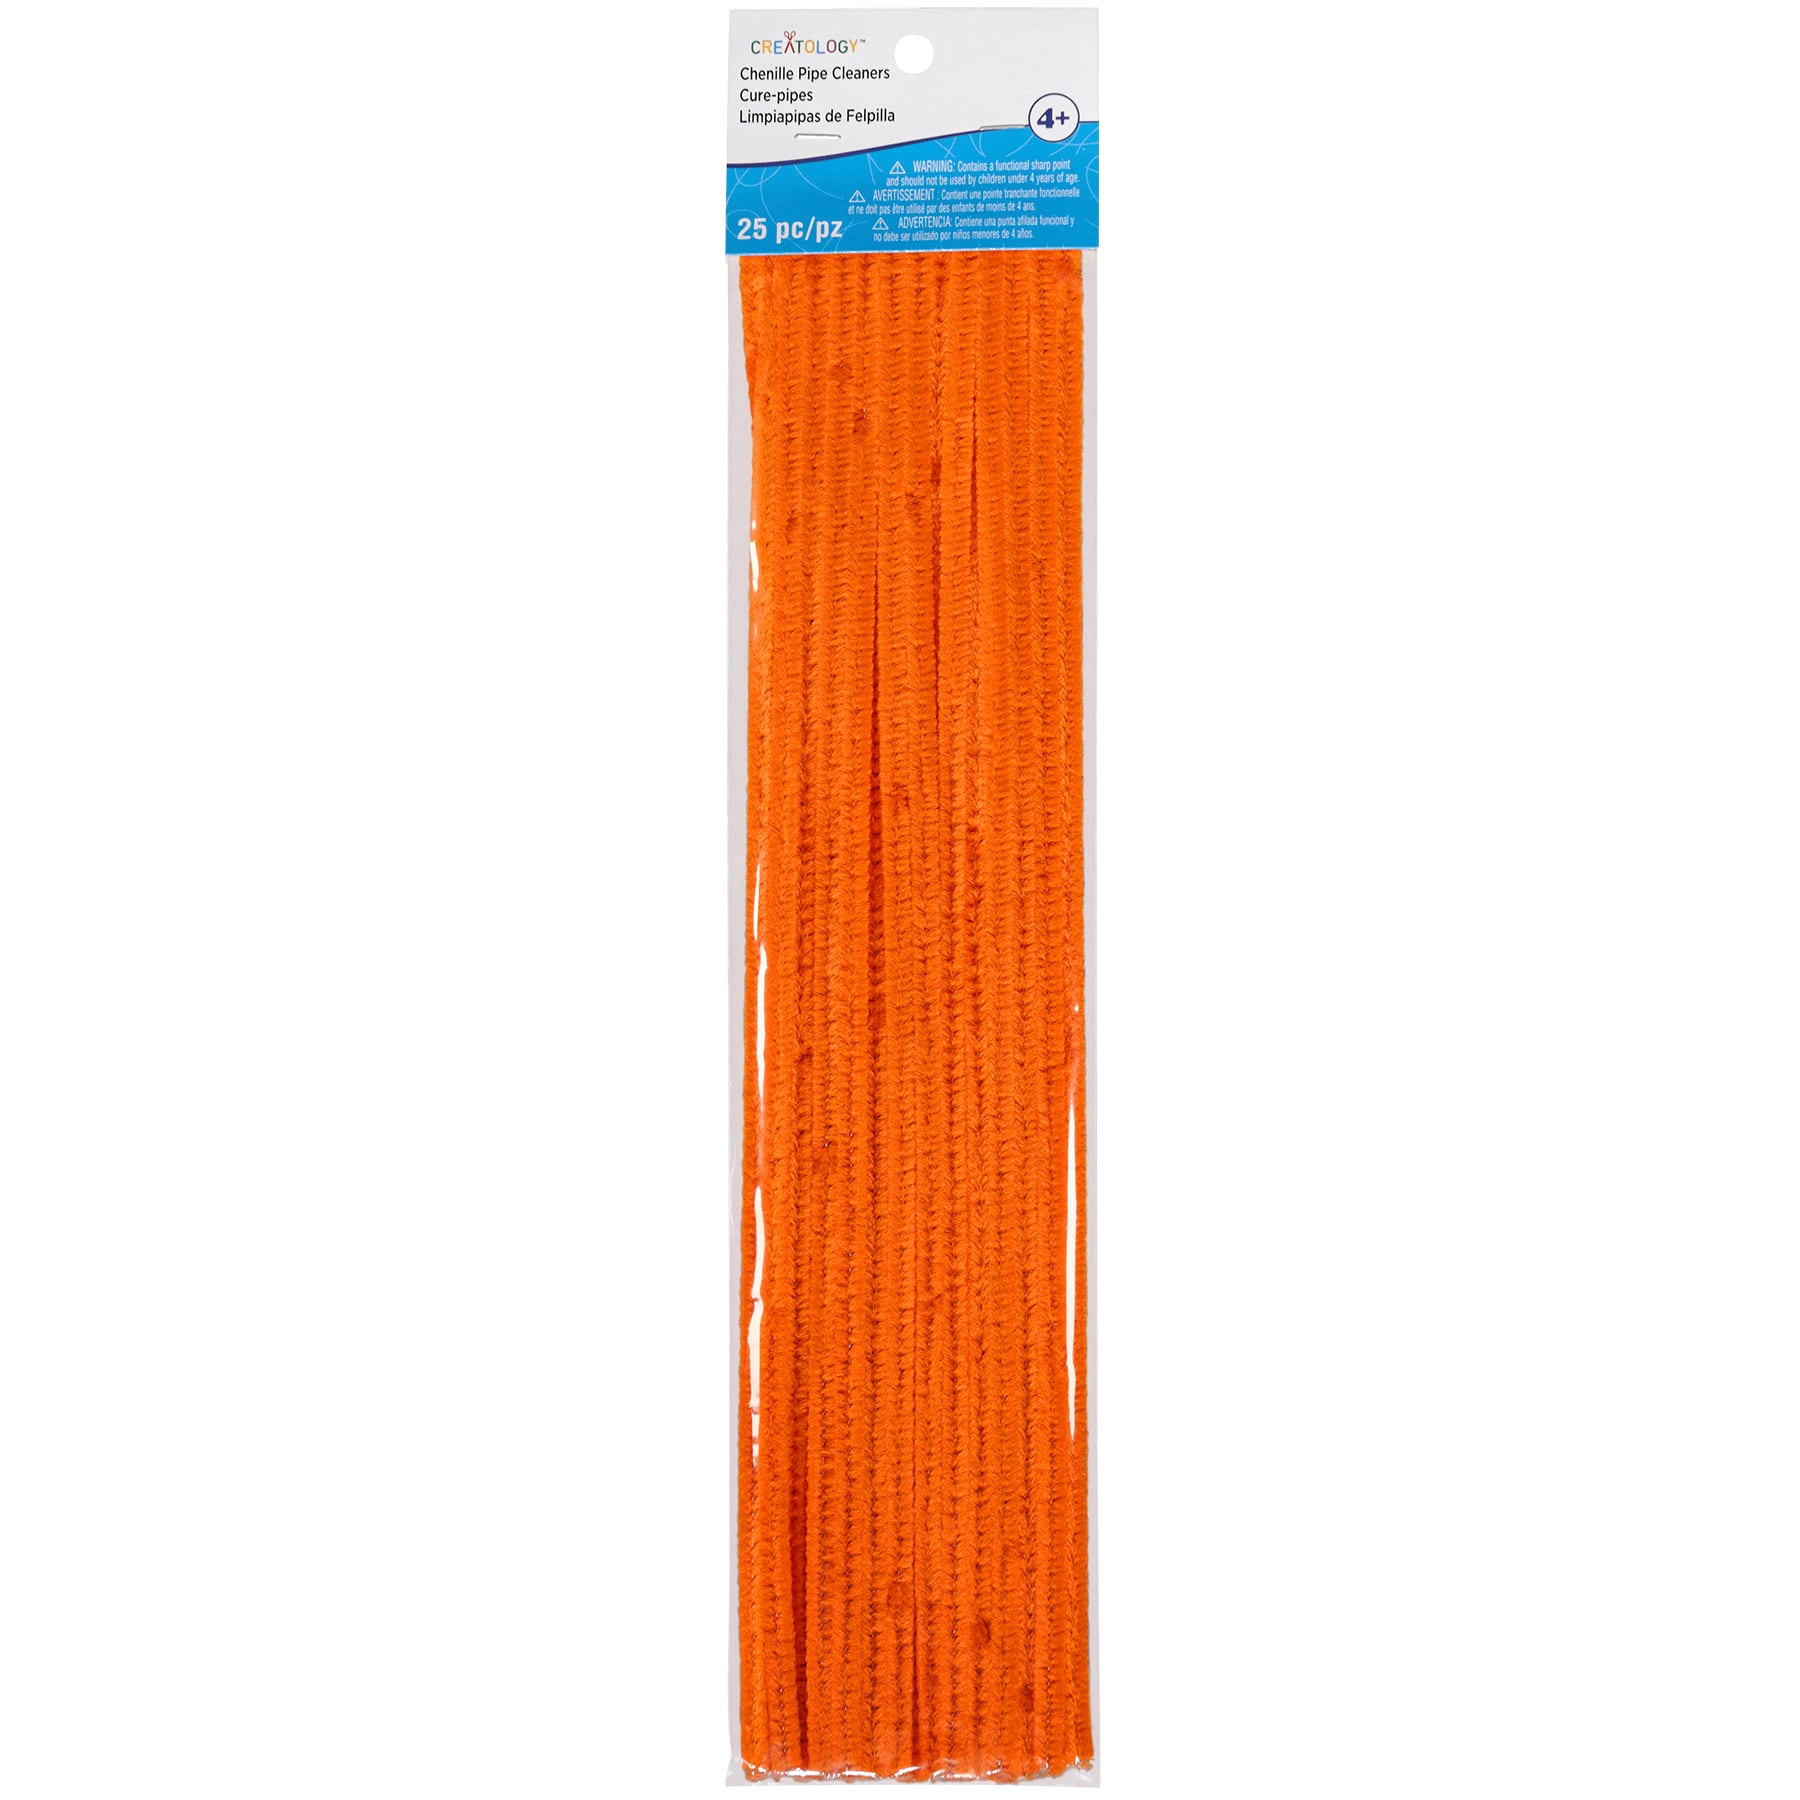 6mm wide 50 pack SALMON ORANGE chenille craft stems pipe cleaners 30cm long 